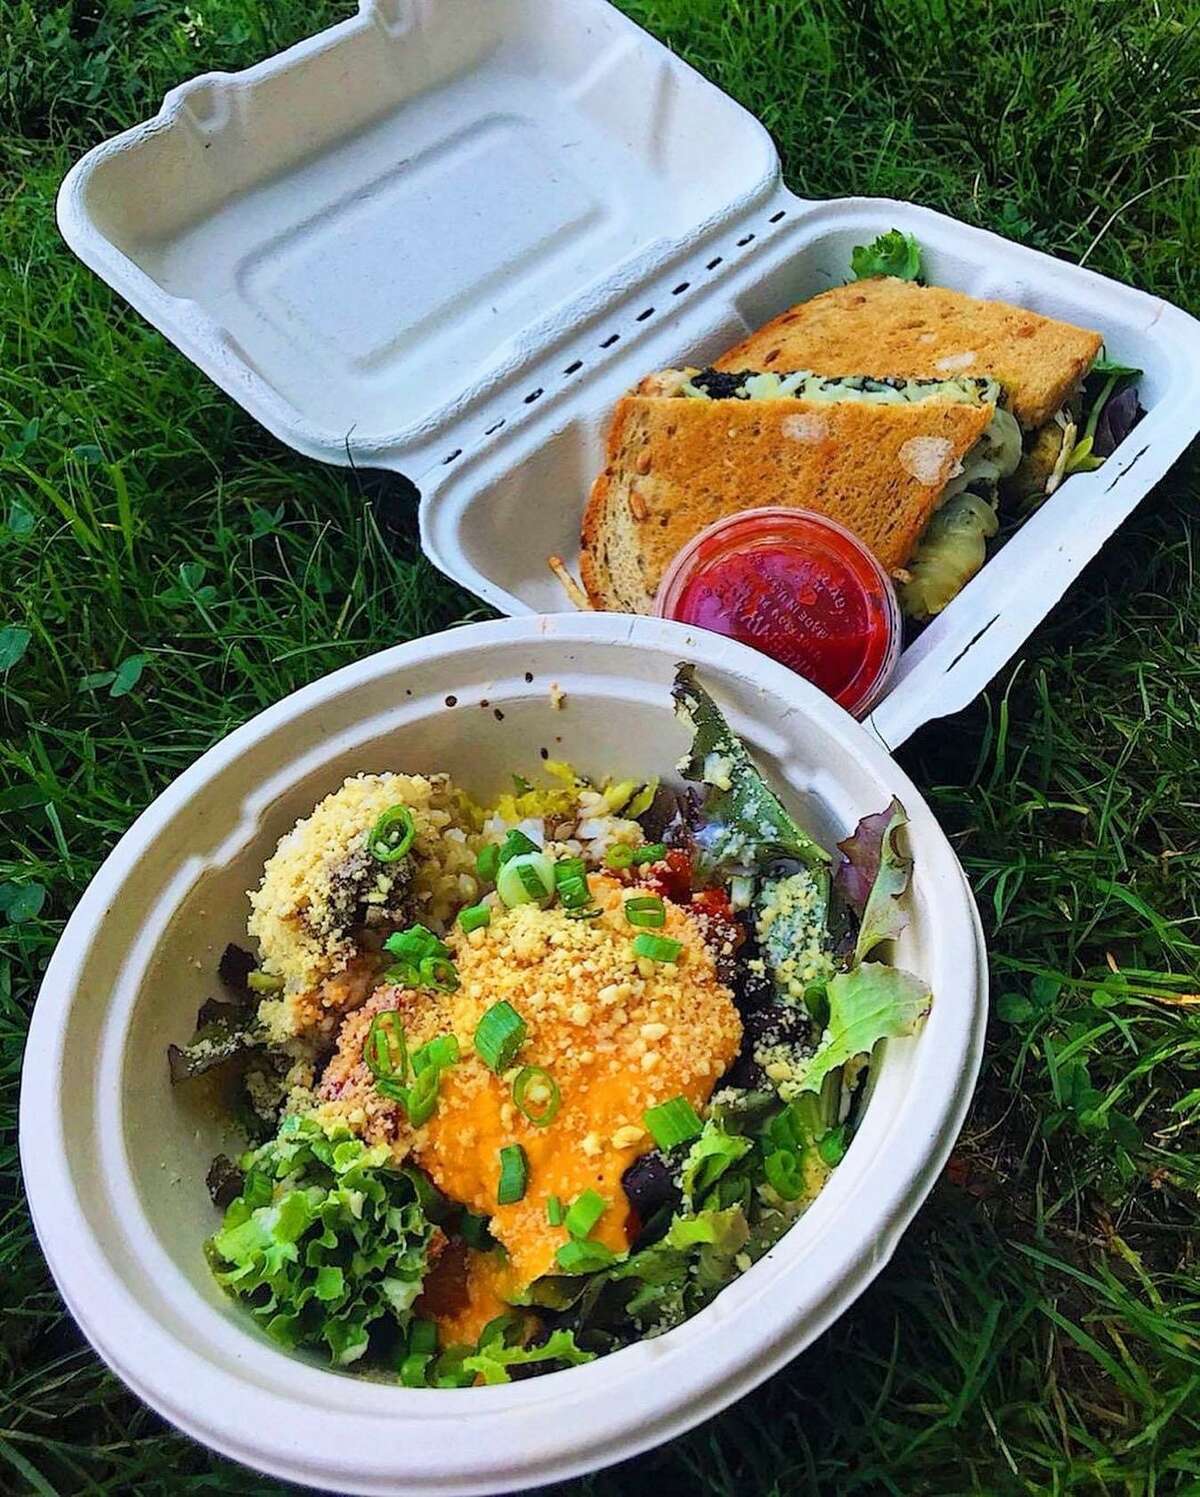 A Zen Buddha bowl and vegan grilled cheese sandwich from GMonkey, which will open a brick-and-mortar restaurant in West Hartford this summer.